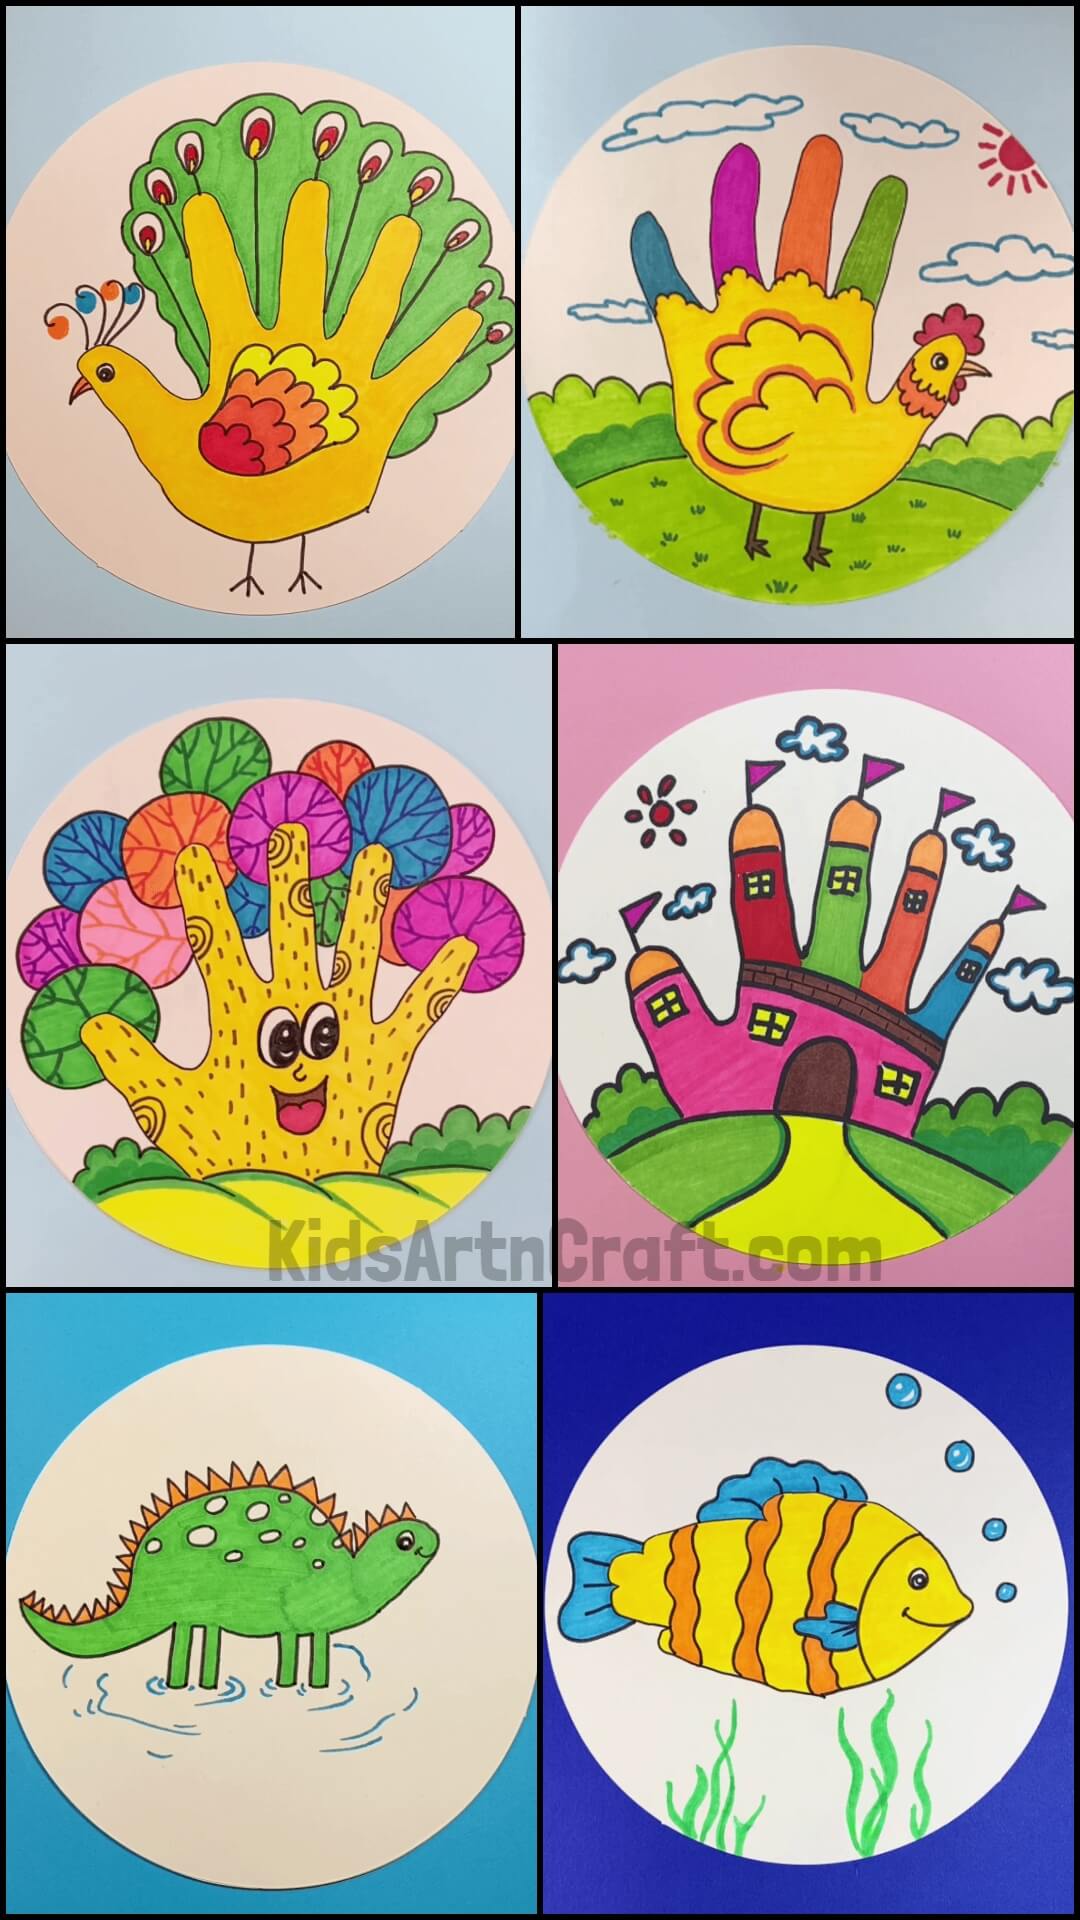 Circular Drawings for Kids with Colors